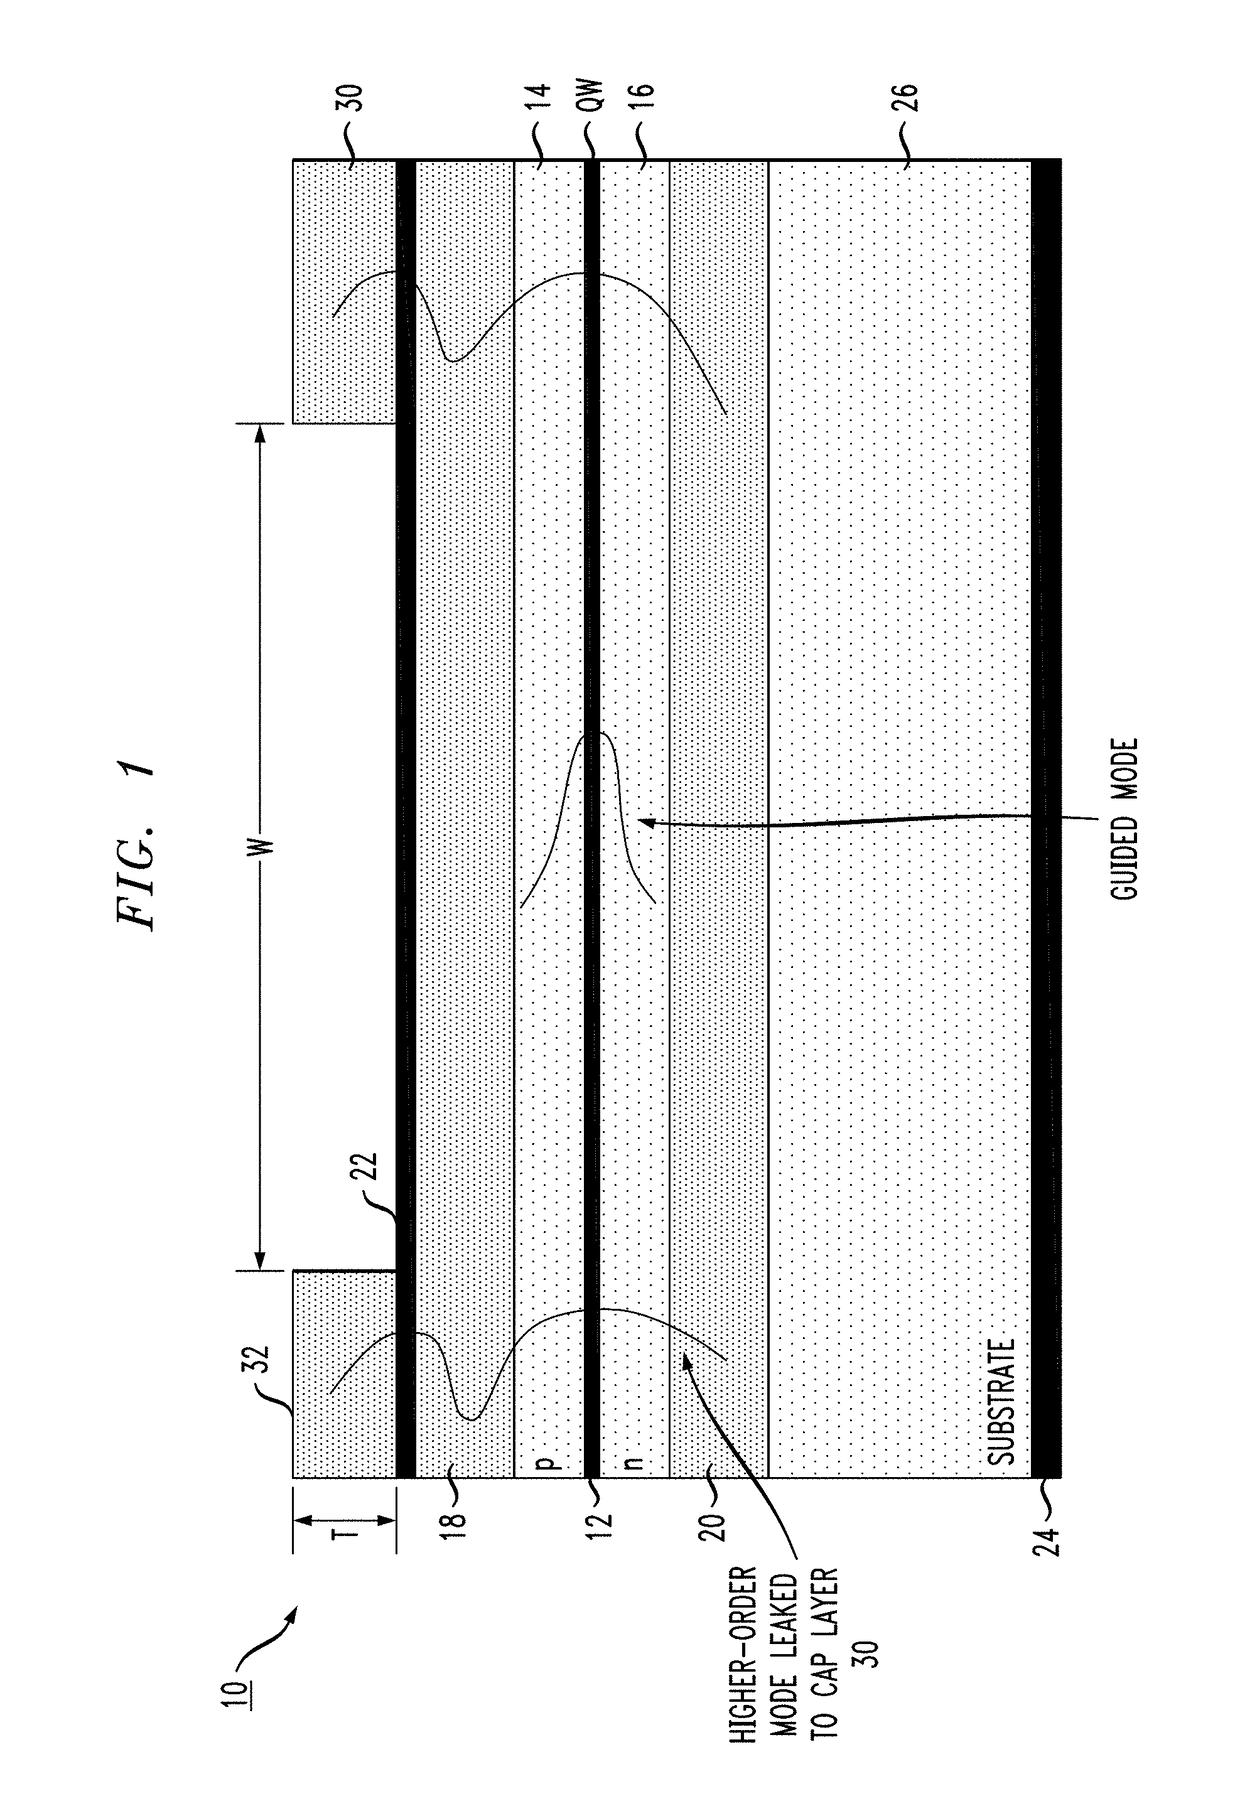 Broad area laser including anti-guiding regions for higher-order lateral mode suppression